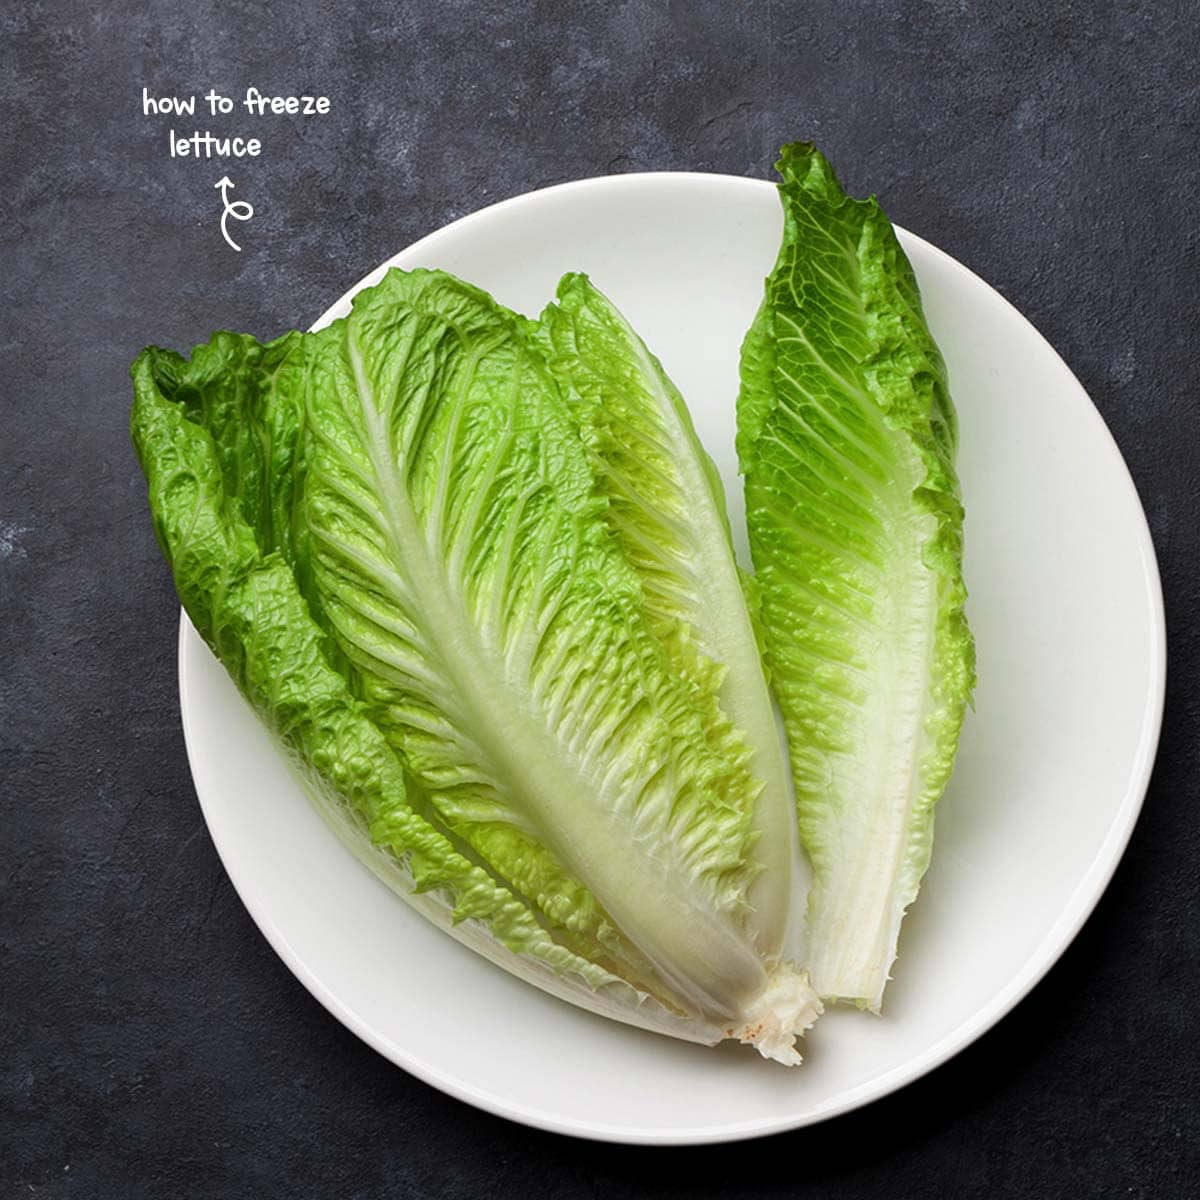 To stay nice and crisp, lettuce requires air, and moisture, but in moderation. Too much of either will result in it wilting.